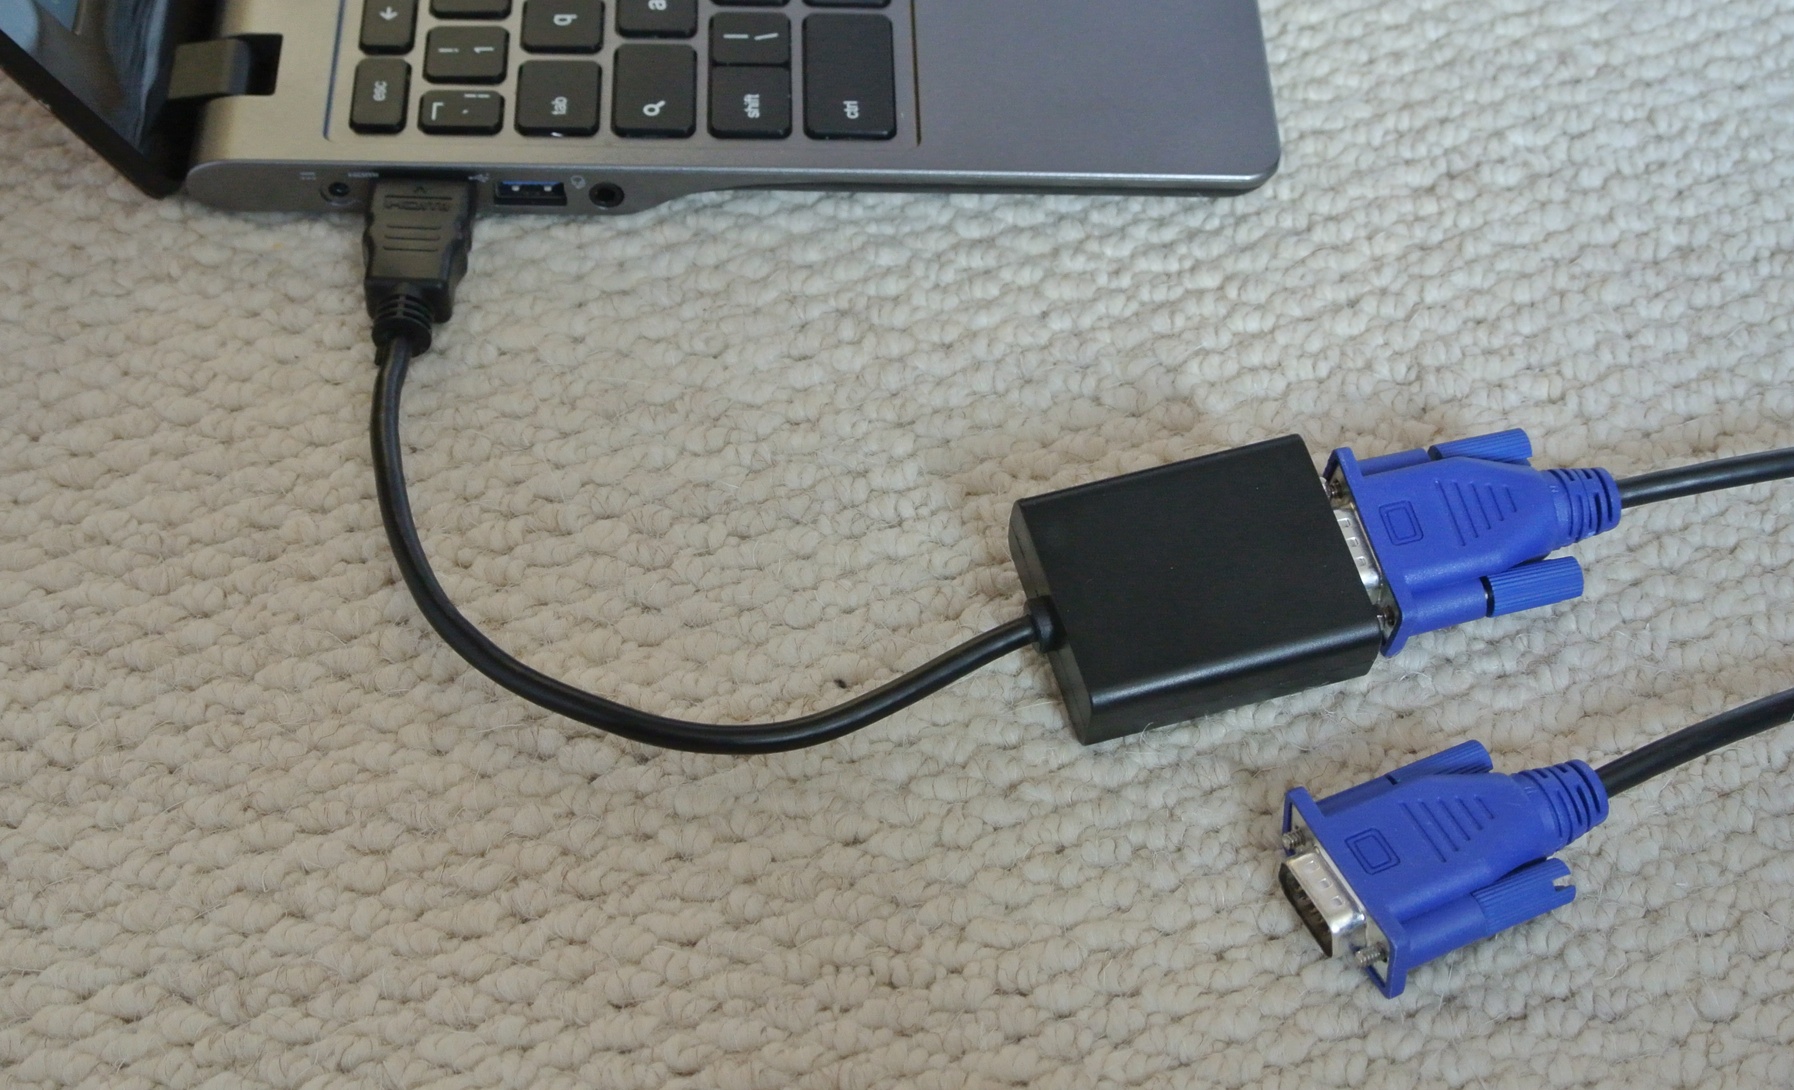 connect video projector to laptop by hdmi windows 10